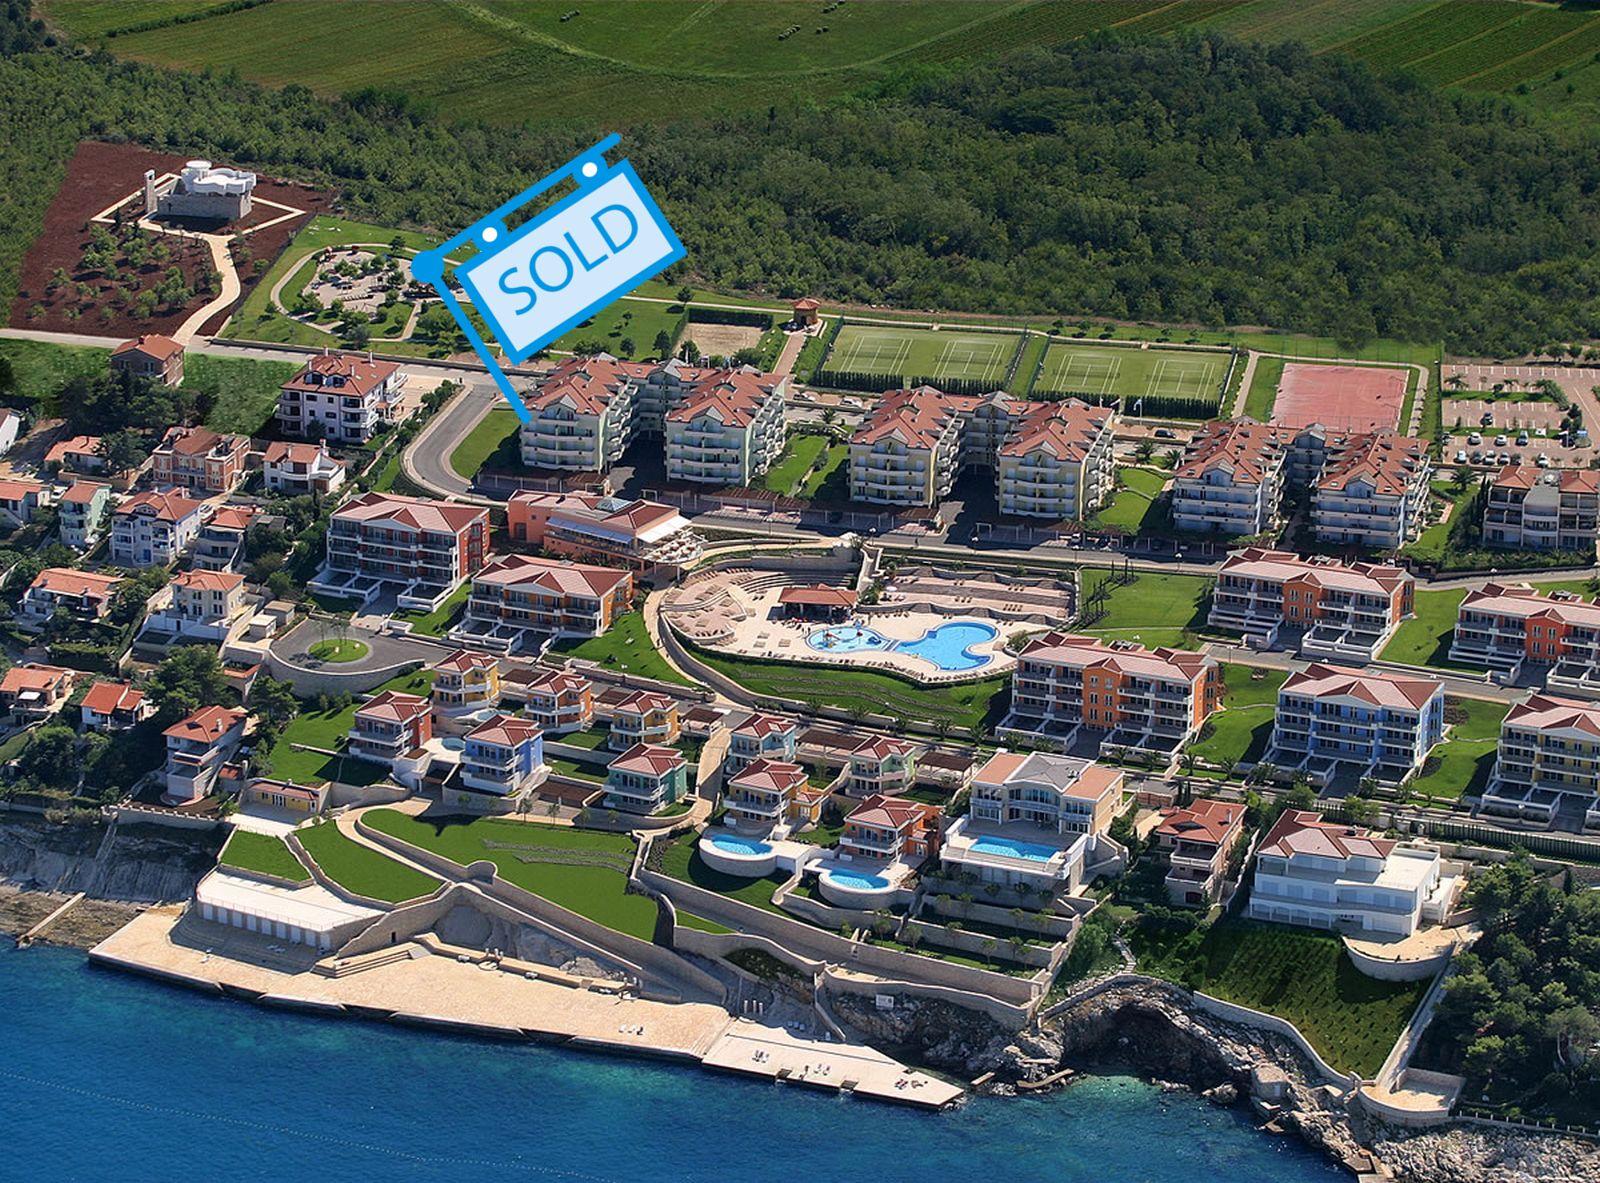 Exclusive sale! Luxury apartments Istria Farkas is selling a beautiful luxury apartment in the golf resort Kempinski.